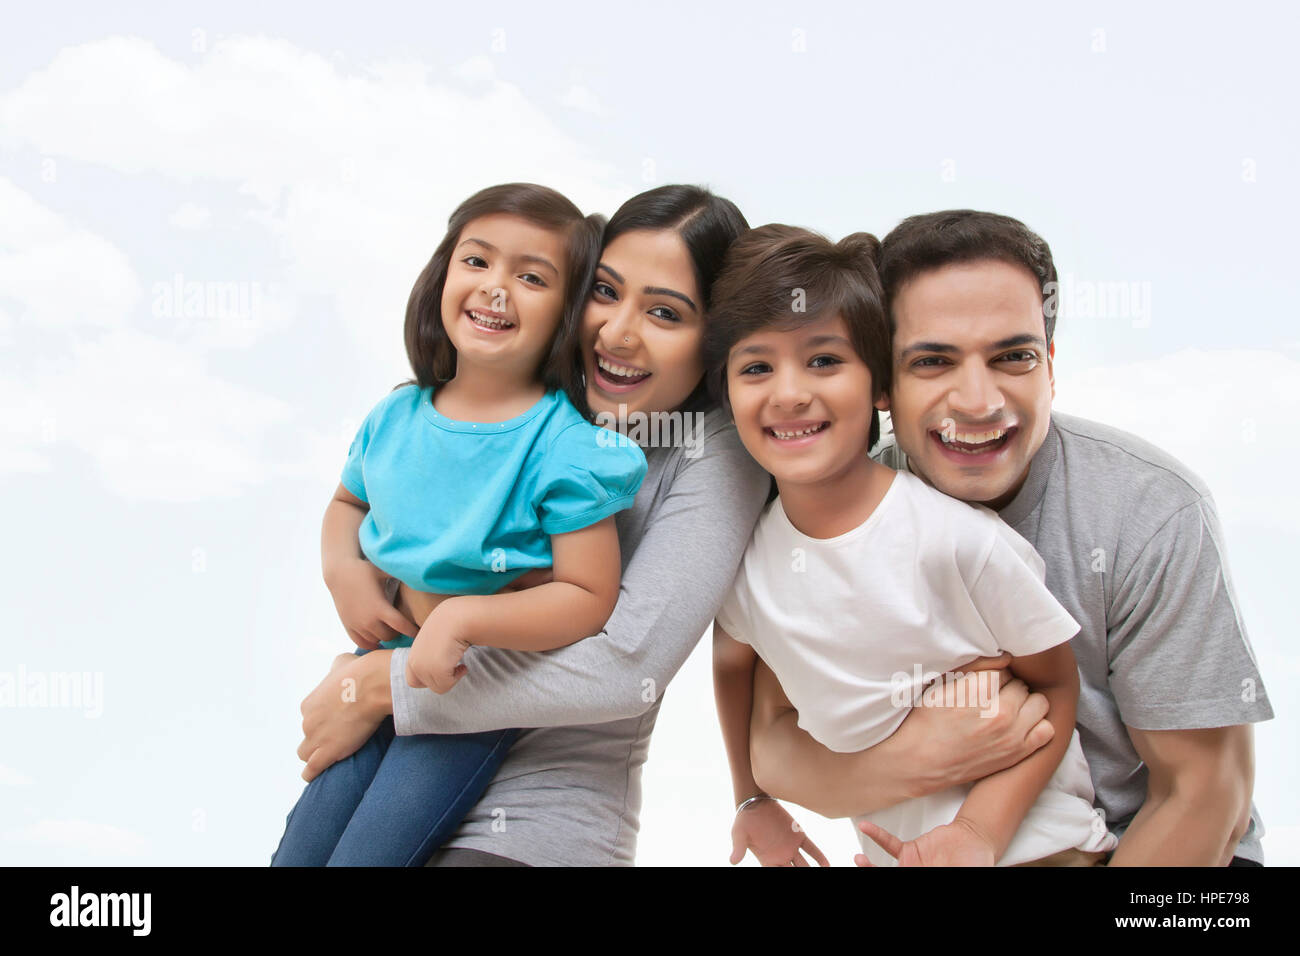 Portrait of happy young parents and two children Stock Photo